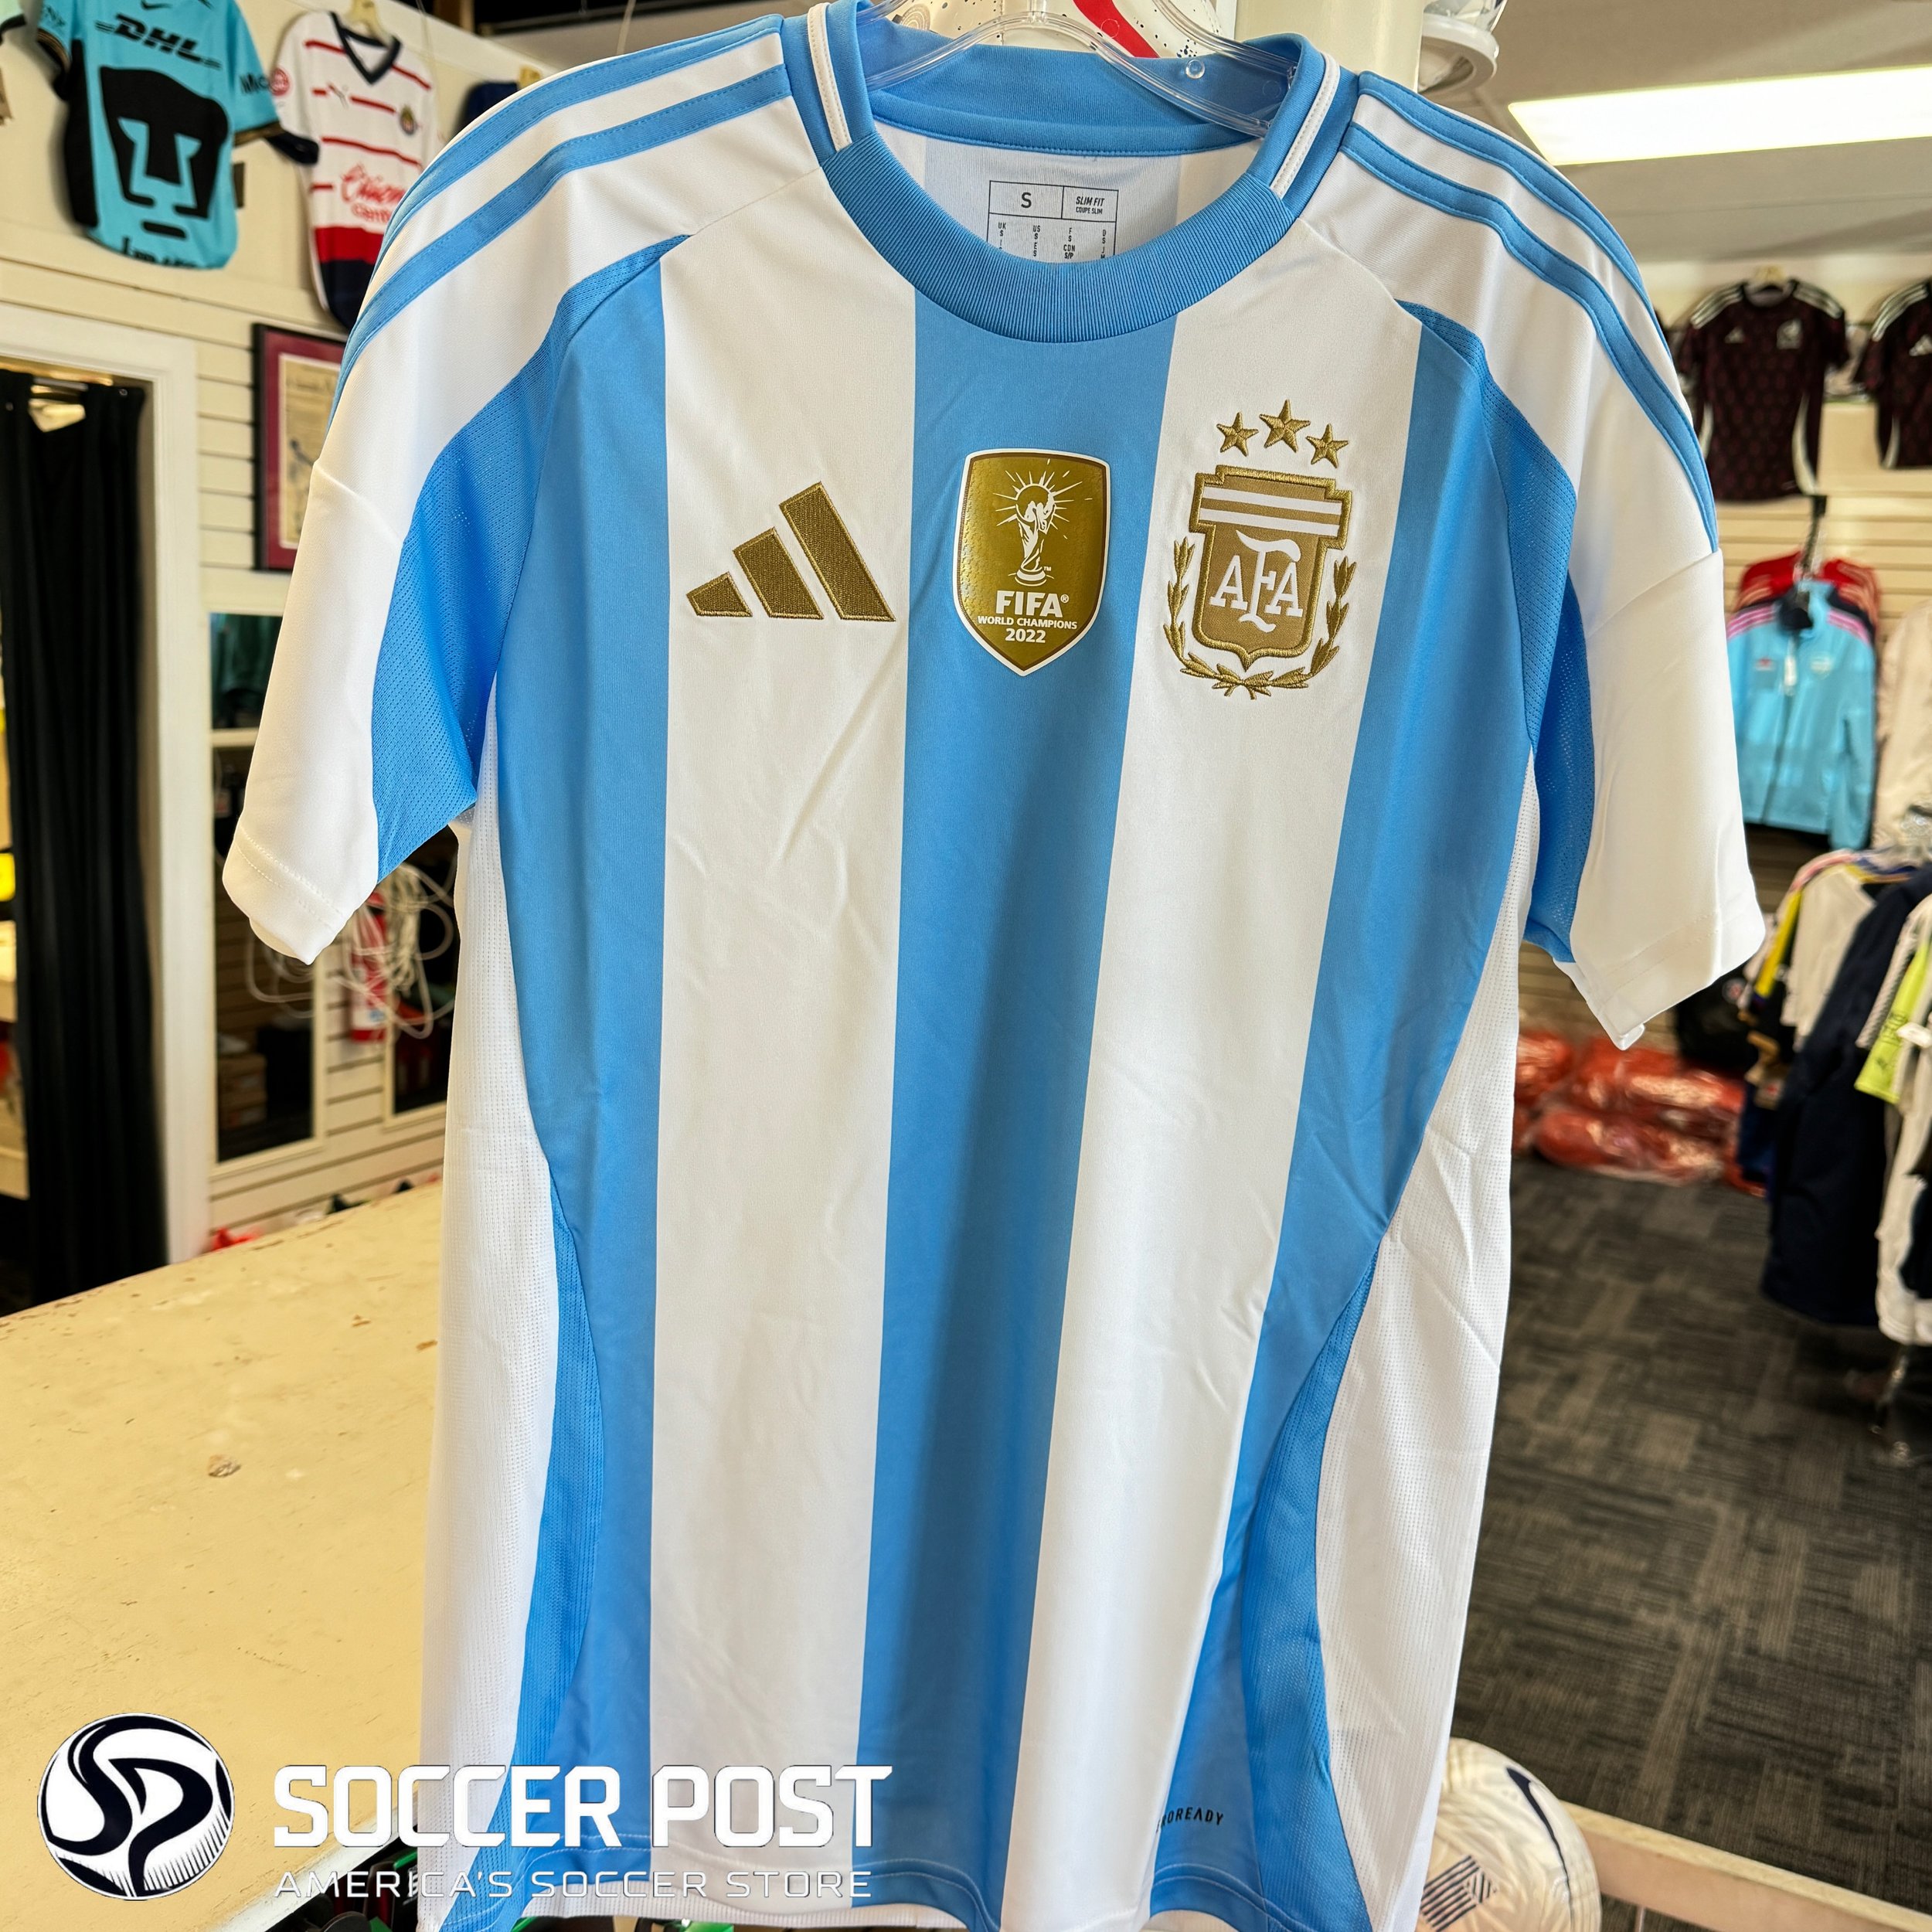 The defending World Cup champions, Argentina open group stage play of the 2024 Copa America against Canada on June 20th. Pick up their home and/or away kits, now, at Soccer Post
⚽️
6929 N. Willow Ave. STE 109 #Fresno, CA
⚽️
#Madera #Sanger #Clovis